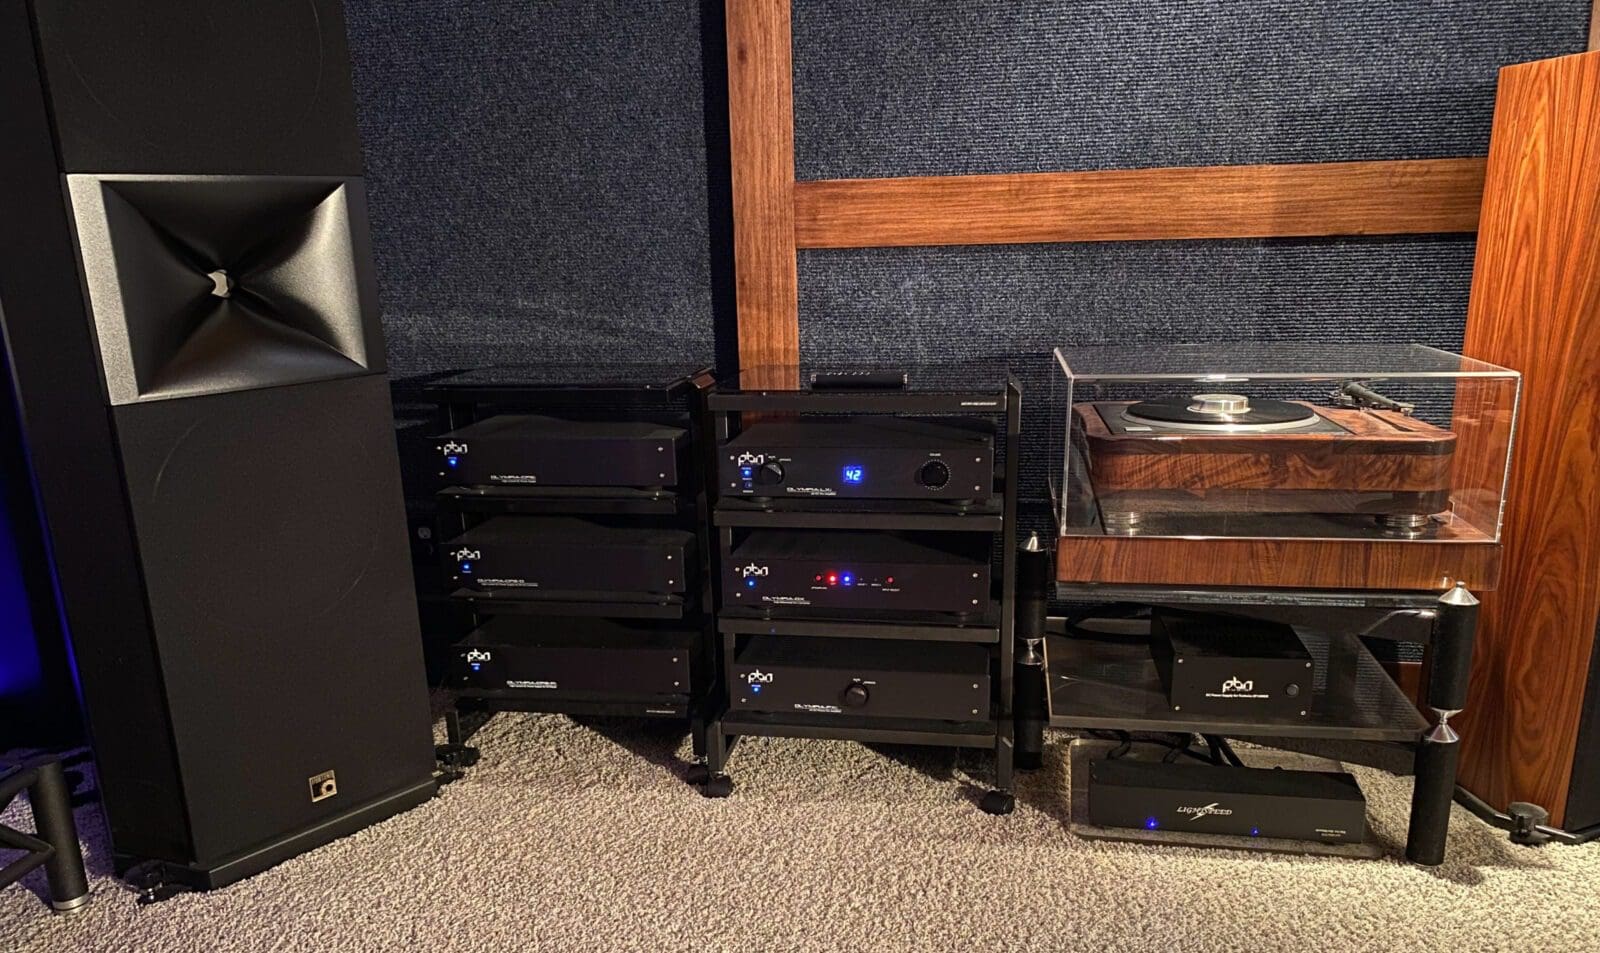 The Sound Station's PBN Audio 2 Channel system